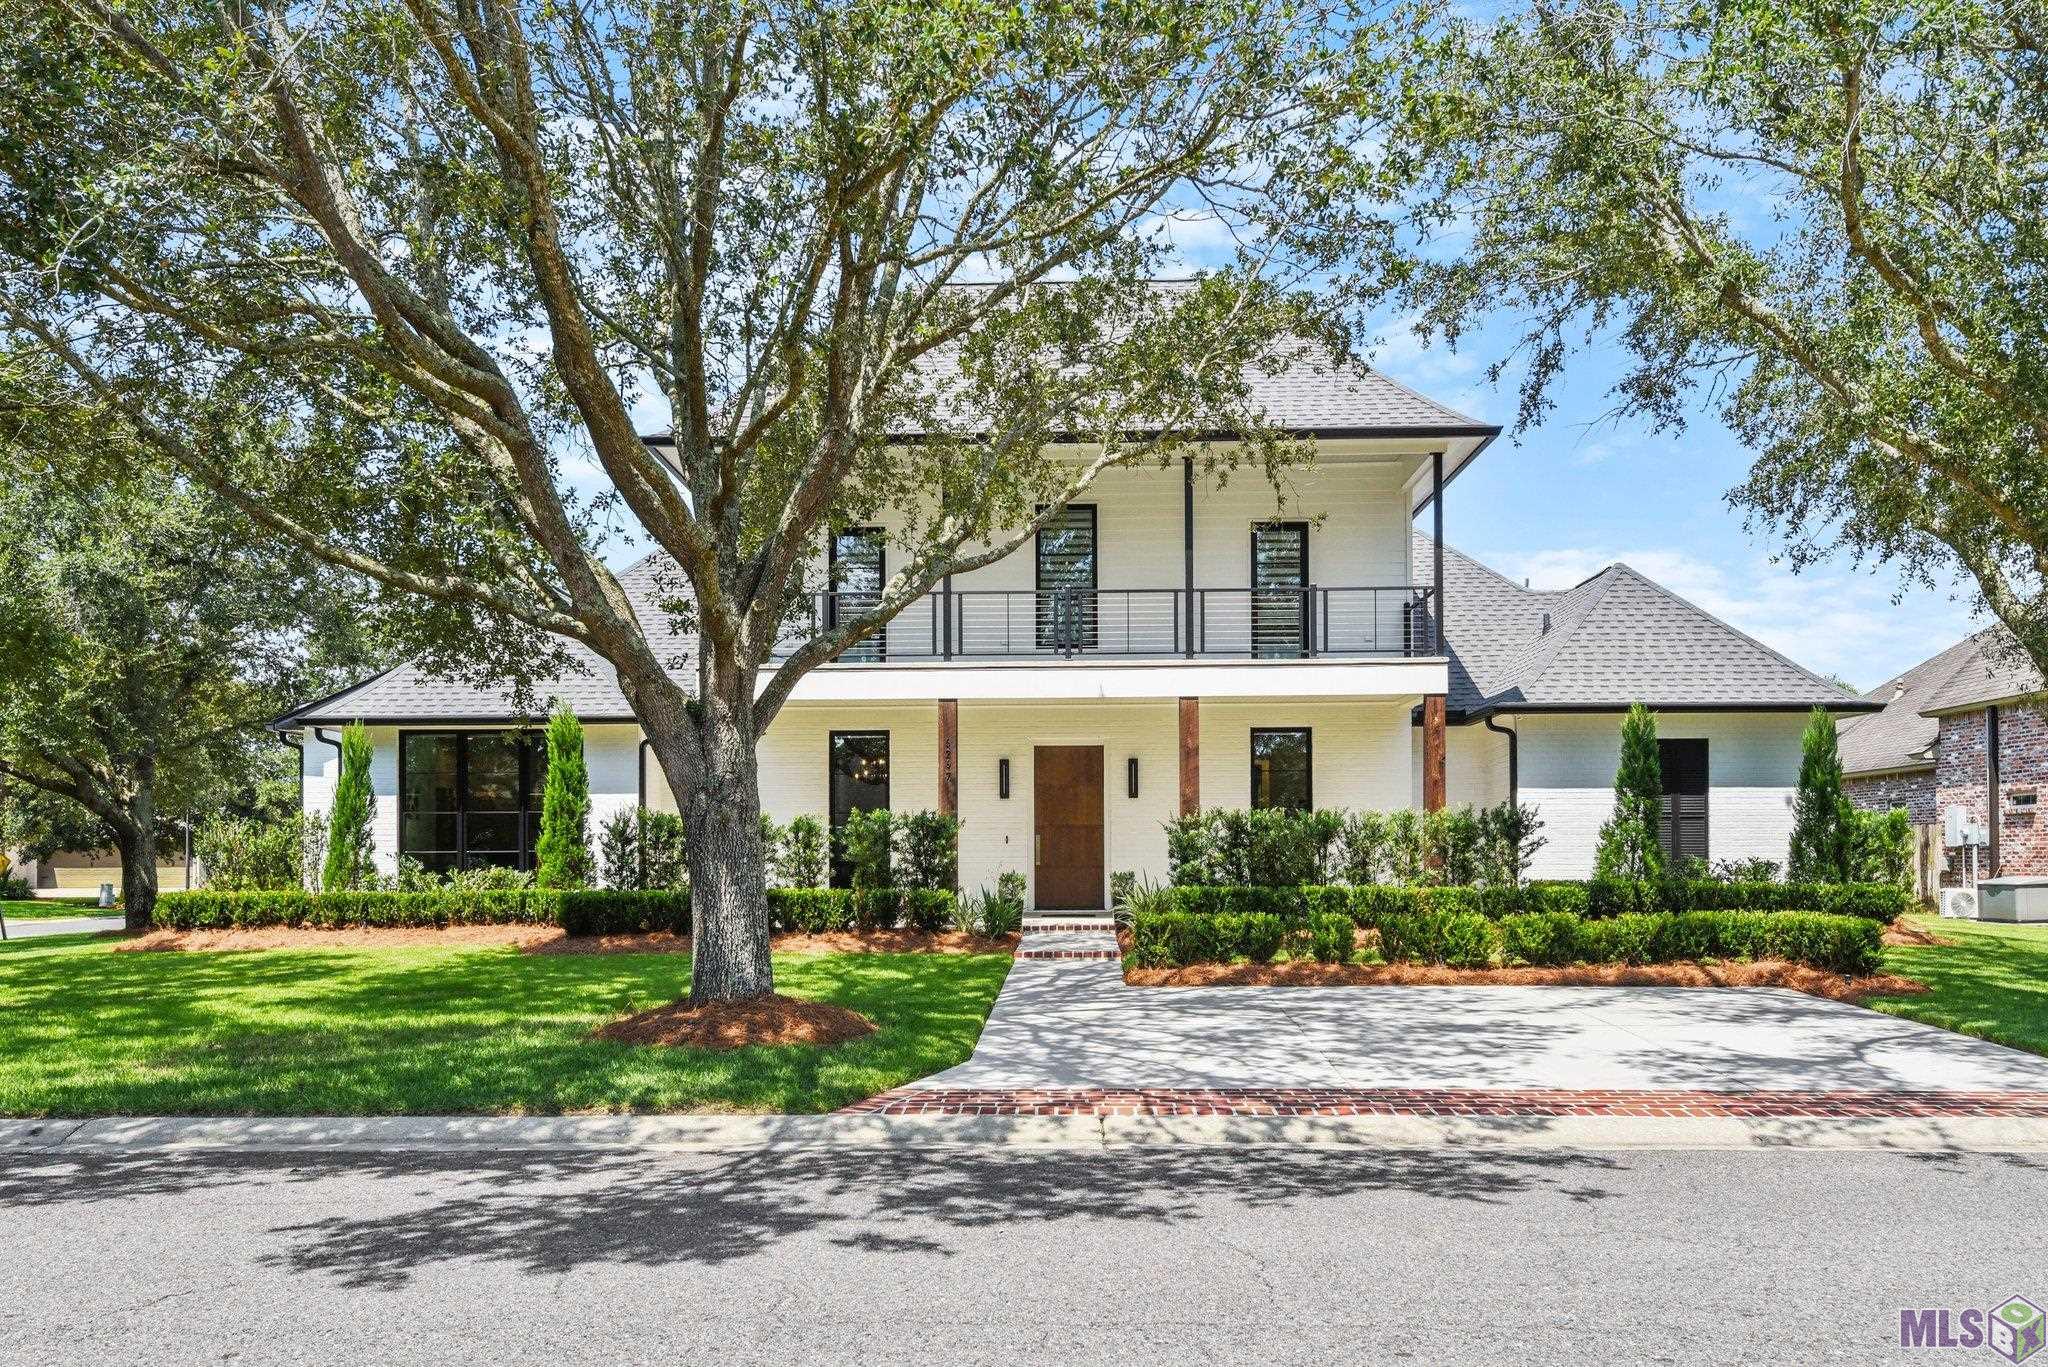 MAGNIFICENT CUSTOM BUILT HOME IN PELICAN POINT GOLF COMMUNITY.  This 2 year old beauty has 4000 sq ft of living area and over 6000 total sq ft.  It features 4 bedrooms, 3.5 baths, formal dining room & a breakfast room, an office, a flex space room and a bonus room.  From the minute you drive up, you will know that every little detail was thought out and the best of everything was put into this home.  Interior Amenities Include:  Subzero Fridge, Cove Dishwasher, Wolf Stove/Oven/Microwave, Galley Brand Sink & Faucet, Spice & Pegged Kitchen Drawers, Quartz & Soap Stone Counters throughout home, Subzero Beverage Center, Remote Control Blinds, High-end Faucets & Fixtures & a Central Vacuum w/sweep outlets.  Exterior Amenities Include:  Huge Corner Lot, Outdoor Kitchen, Oversized Garage, Lincoln Brand Windows, Insulated Garage Doors, Full Yard Irrigation System, Industrial Fiber Reinforced Concrete for Home & Driveways, Alarm/Camera Sec. System, Gutters W/Leaf Guard, Foil Back Roof Decking & a 32K Liquid Cooled Whole House Generator.  WHAT A GREAT HOUSE TO CALL HOME!